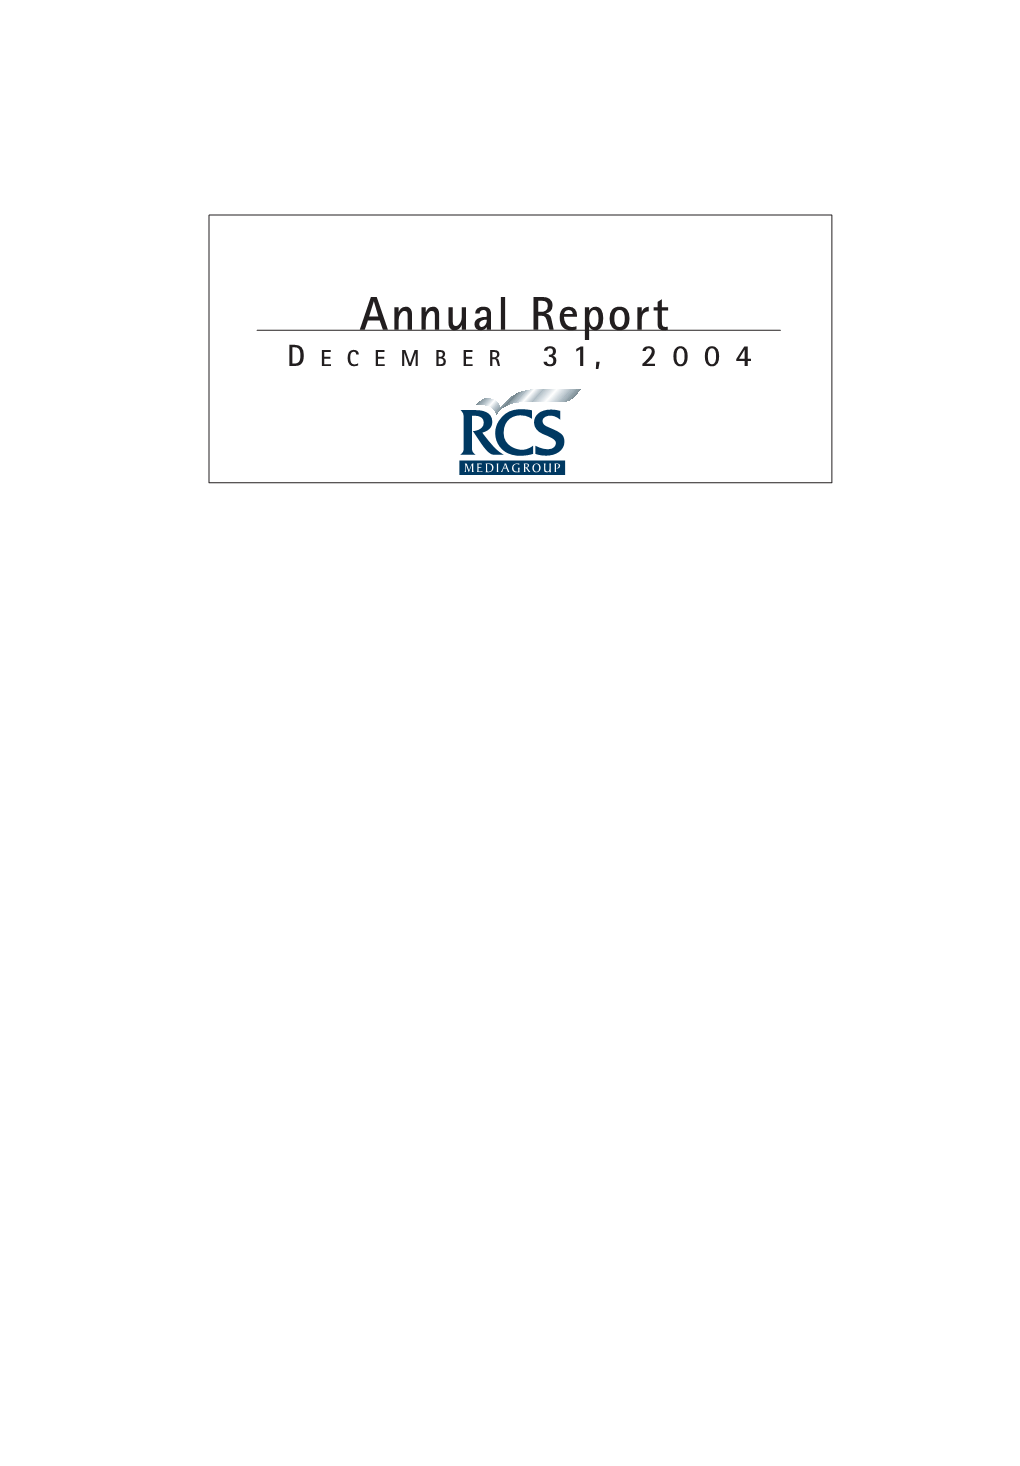 Annual Report D ECEMBER 31, 2004 This Is an English Traslation of the Italian Annual Report, Which Is the Sole Authoritative Version 4 Annual General Meeting